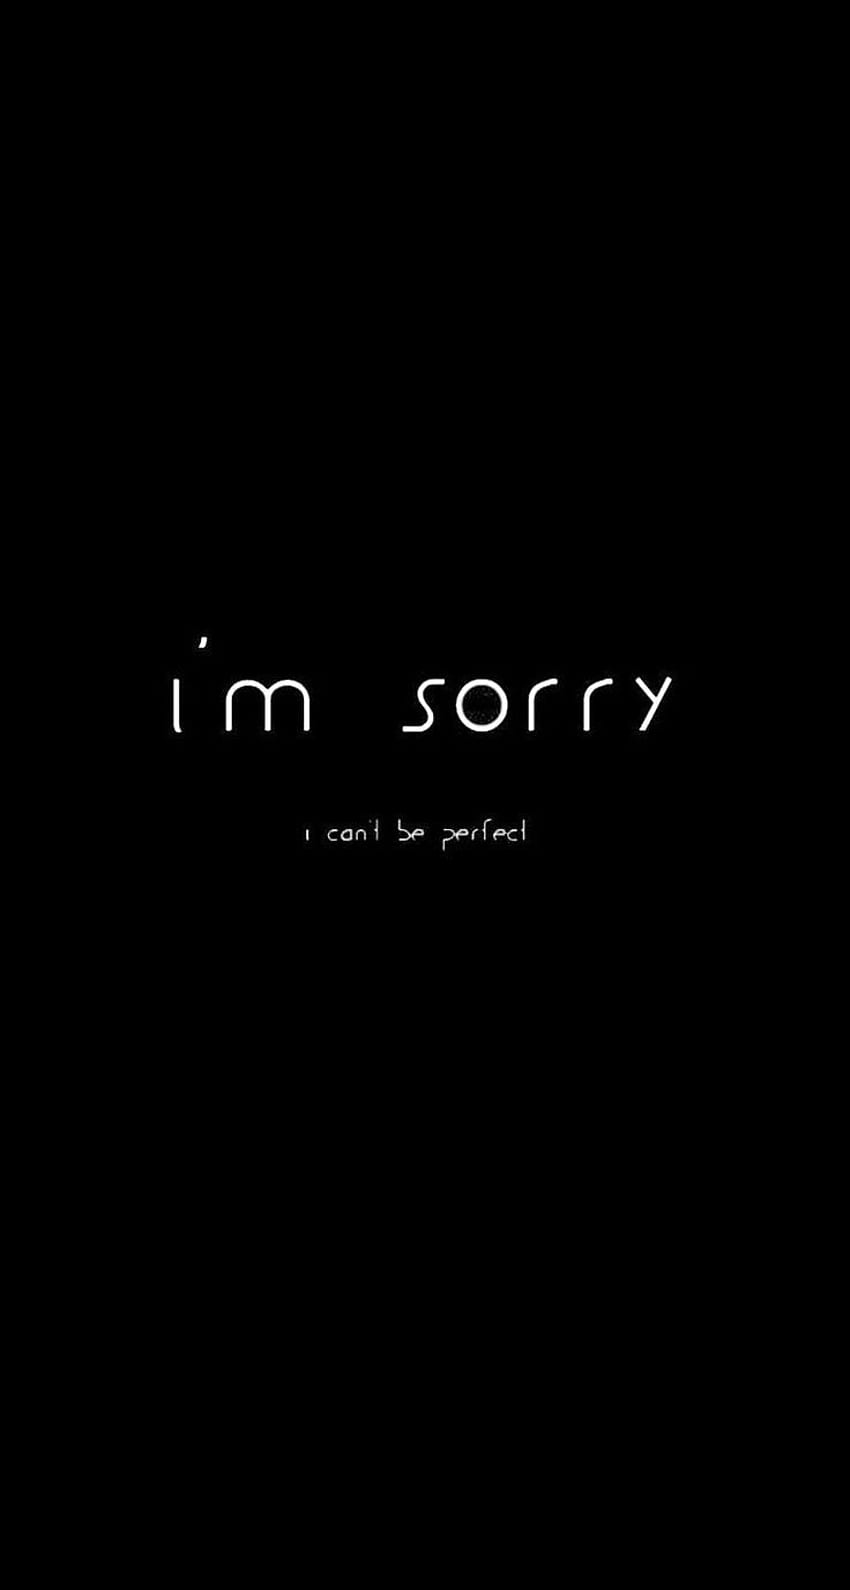 I'm sorry I can't be perfect - Depressing